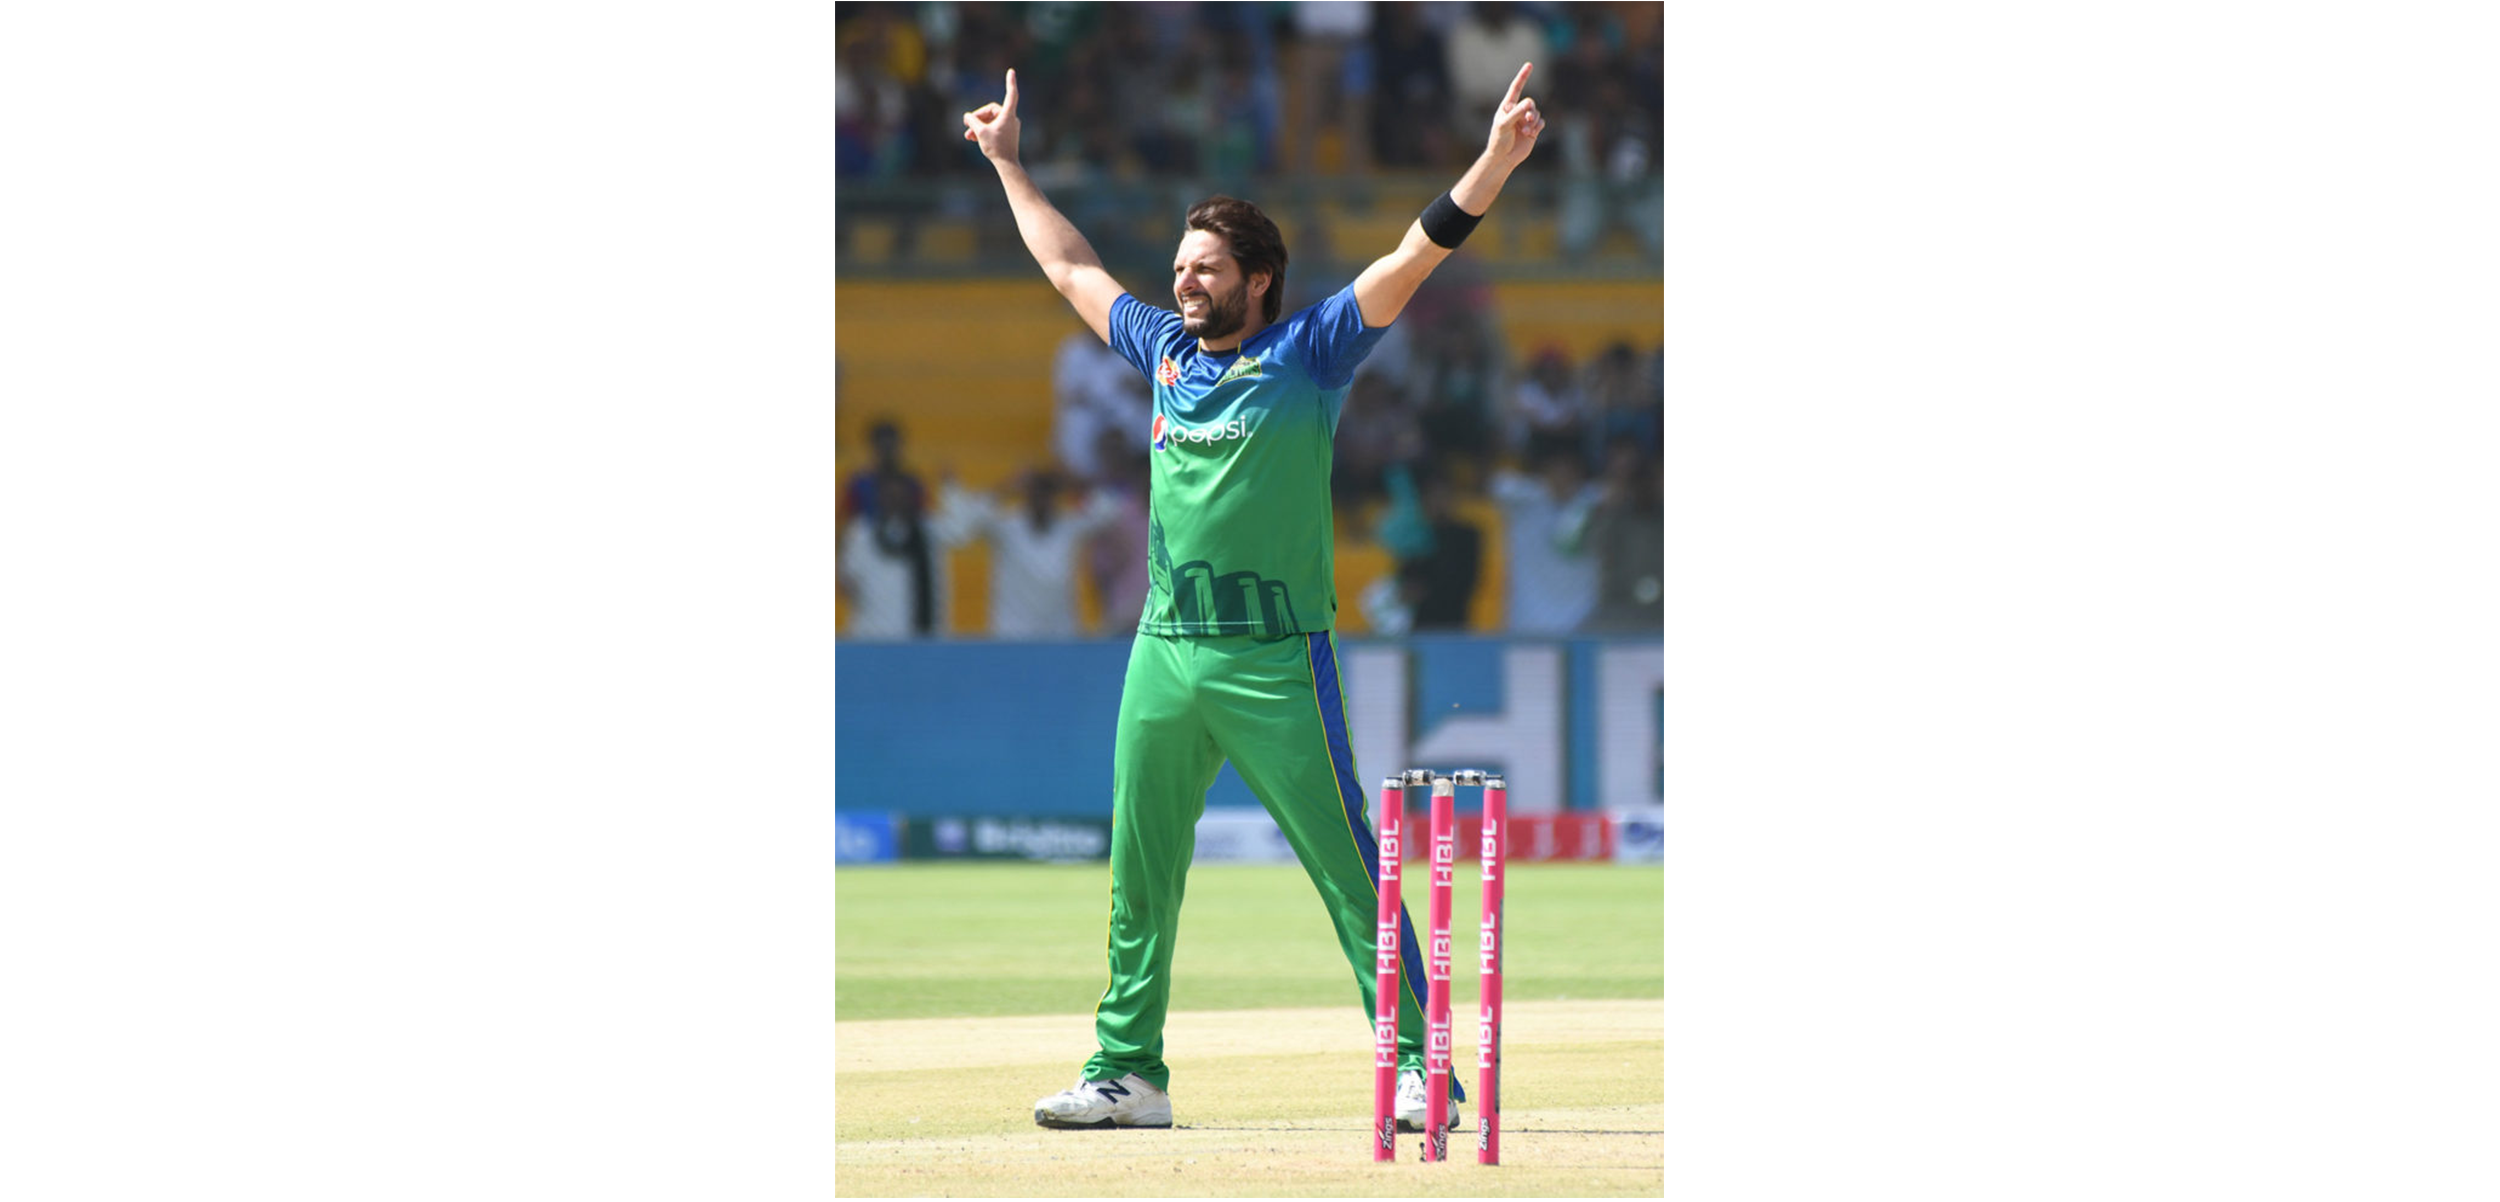 PCB: Shahid Afridi ruled out of HBL PSL 6 due to back injury